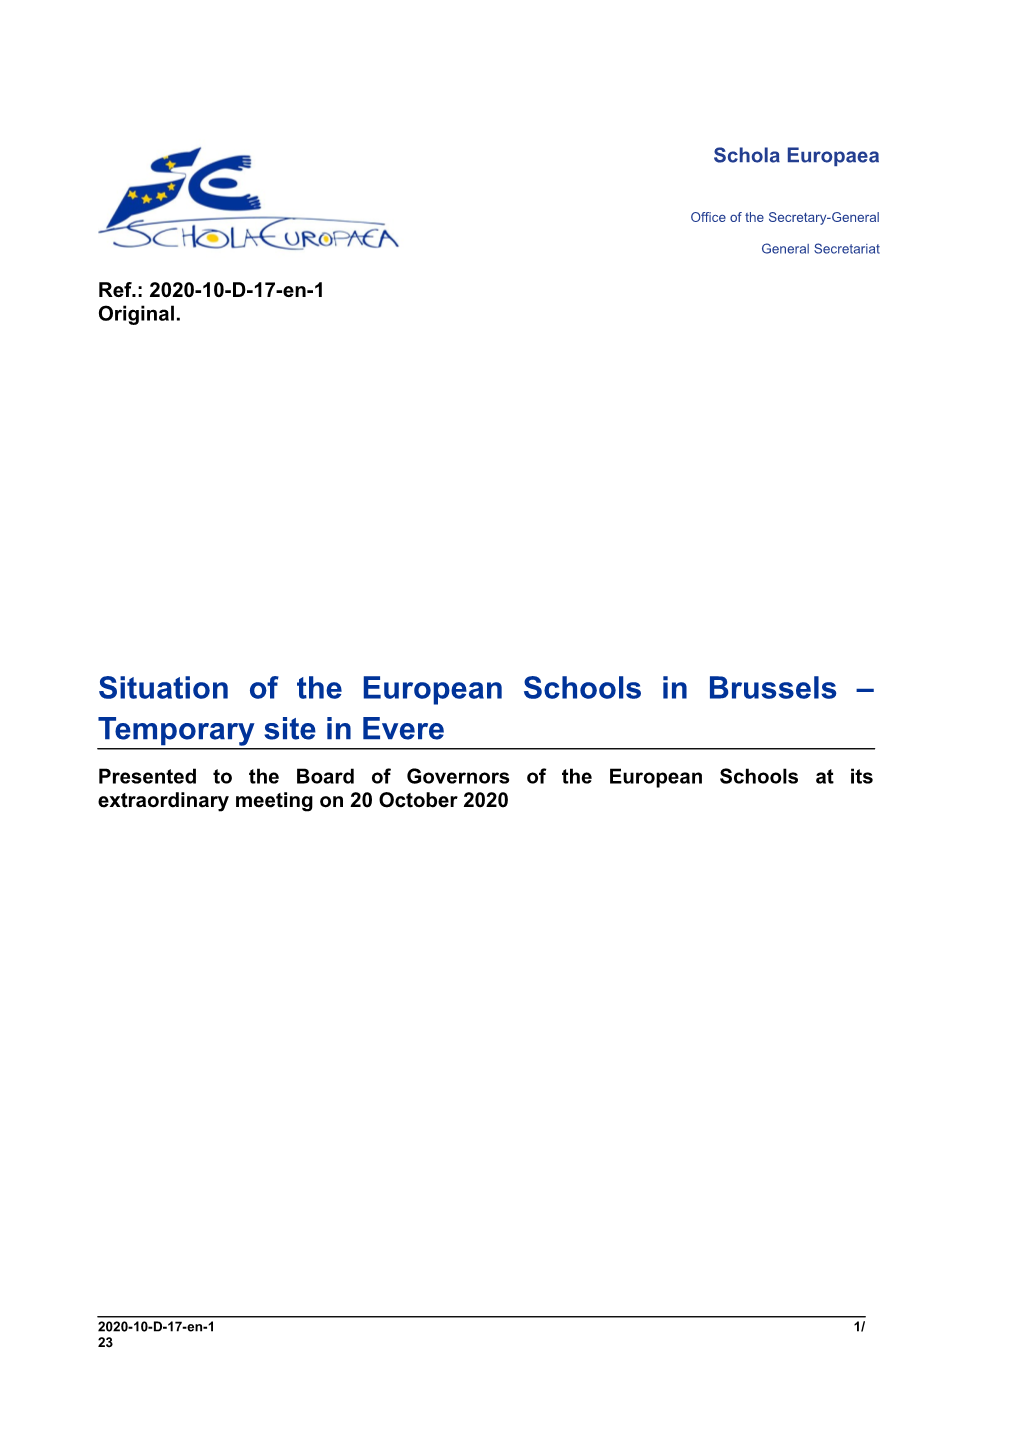 Situation of the European Schools in Brussels – Temporary Site in Evere